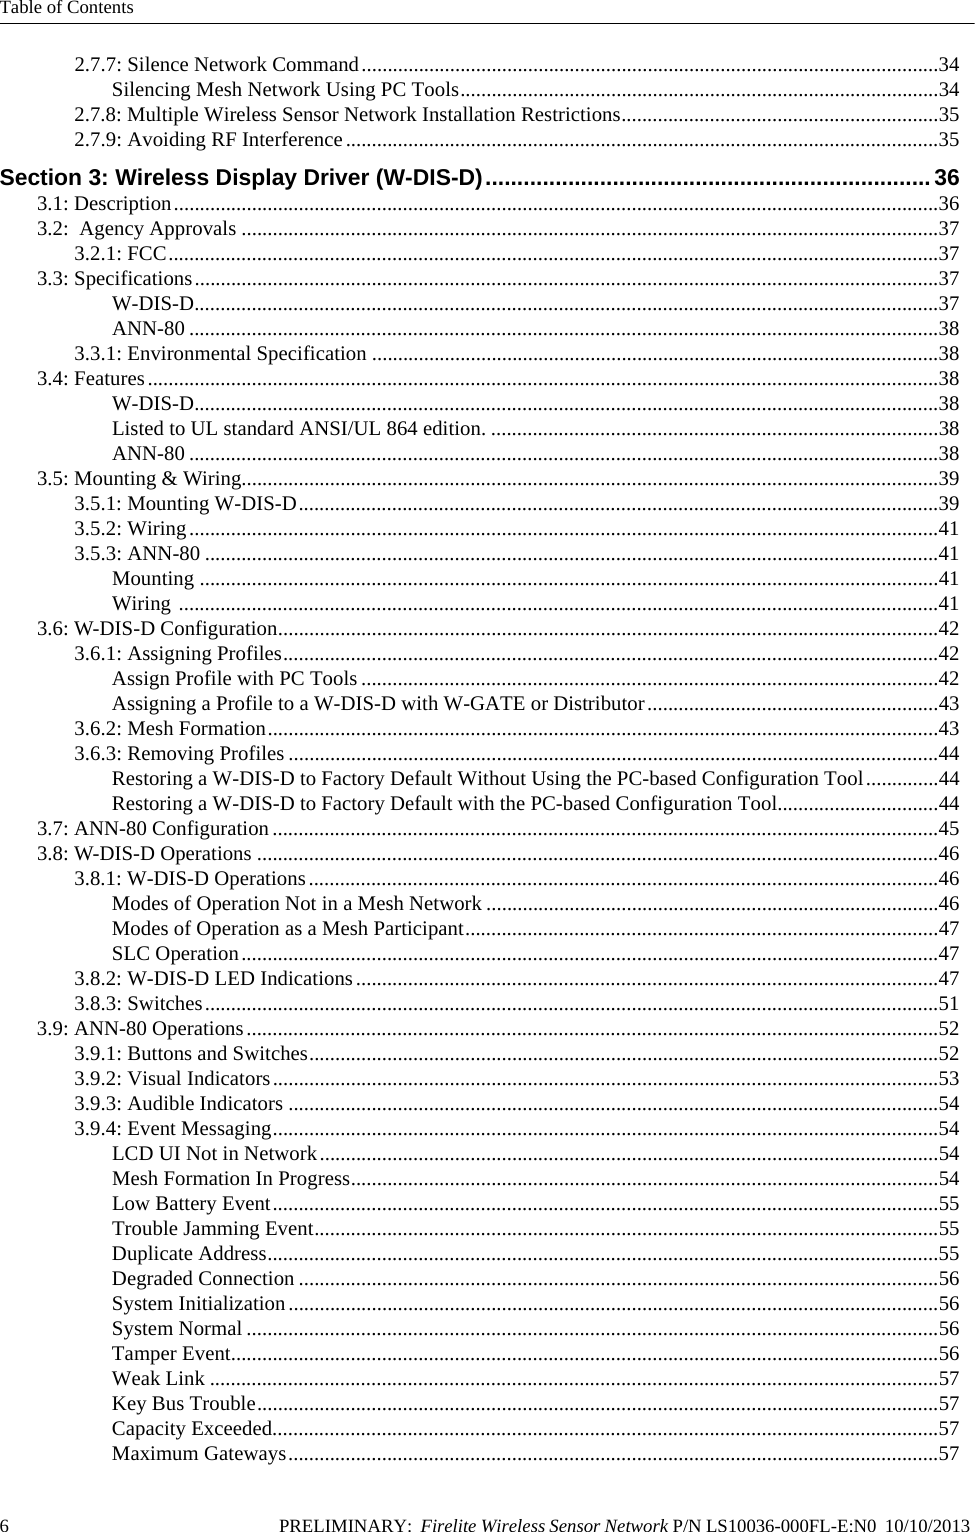 Table of Contents6 PRELIMINARY:  Firelite Wireless Sensor Network P/N LS10036-000FL-E:N0  10/10/2013 2.7.7: Silence Network Command...............................................................................................................34Silencing Mesh Network Using PC Tools............................................................................................342.7.8: Multiple Wireless Sensor Network Installation Restrictions.............................................................352.7.9: Avoiding RF Interference..................................................................................................................35Section 3: Wireless Display Driver (W-DIS-D)......................................................................363.1: Description...................................................................................................................................................363.2:  Agency Approvals ......................................................................................................................................373.2.1: FCC....................................................................................................................................................373.3: Specifications...............................................................................................................................................37W-DIS-D...............................................................................................................................................37ANN-80 ................................................................................................................................................383.3.1: Environmental Specification .............................................................................................................383.4: Features........................................................................................................................................................38W-DIS-D...............................................................................................................................................38Listed to UL standard ANSI/UL 864 edition. ......................................................................................38ANN-80 ................................................................................................................................................383.5: Mounting &amp; Wiring......................................................................................................................................393.5.1: Mounting W-DIS-D...........................................................................................................................393.5.2: Wiring................................................................................................................................................413.5.3: ANN-80 .............................................................................................................................................41Mounting ..............................................................................................................................................41Wiring ..................................................................................................................................................413.6: W-DIS-D Configuration...............................................................................................................................423.6.1: Assigning Profiles..............................................................................................................................42Assign Profile with PC Tools ...............................................................................................................42Assigning a Profile to a W-DIS-D with W-GATE or Distributor........................................................433.6.2: Mesh Formation.................................................................................................................................433.6.3: Removing Profiles .............................................................................................................................44Restoring a W-DIS-D to Factory Default Without Using the PC-based Configuration Tool..............44Restoring a W-DIS-D to Factory Default with the PC-based Configuration Tool...............................443.7: ANN-80 Configuration................................................................................................................................453.8: W-DIS-D Operations ...................................................................................................................................463.8.1: W-DIS-D Operations.........................................................................................................................46Modes of Operation Not in a Mesh Network .......................................................................................46Modes of Operation as a Mesh Participant...........................................................................................47SLC Operation......................................................................................................................................473.8.2: W-DIS-D LED Indications................................................................................................................473.8.3: Switches.............................................................................................................................................513.9: ANN-80 Operations.....................................................................................................................................523.9.1: Buttons and Switches.........................................................................................................................523.9.2: Visual Indicators................................................................................................................................533.9.3: Audible Indicators .............................................................................................................................543.9.4: Event Messaging................................................................................................................................54LCD UI Not in Network.......................................................................................................................54Mesh Formation In Progress.................................................................................................................54Low Battery Event................................................................................................................................55Trouble Jamming Event........................................................................................................................55Duplicate Address.................................................................................................................................55Degraded Connection ...........................................................................................................................56System Initialization.............................................................................................................................56System Normal .....................................................................................................................................56Tamper Event........................................................................................................................................56Weak Link ............................................................................................................................................57Key Bus Trouble...................................................................................................................................57Capacity Exceeded................................................................................................................................57Maximum Gateways.............................................................................................................................57